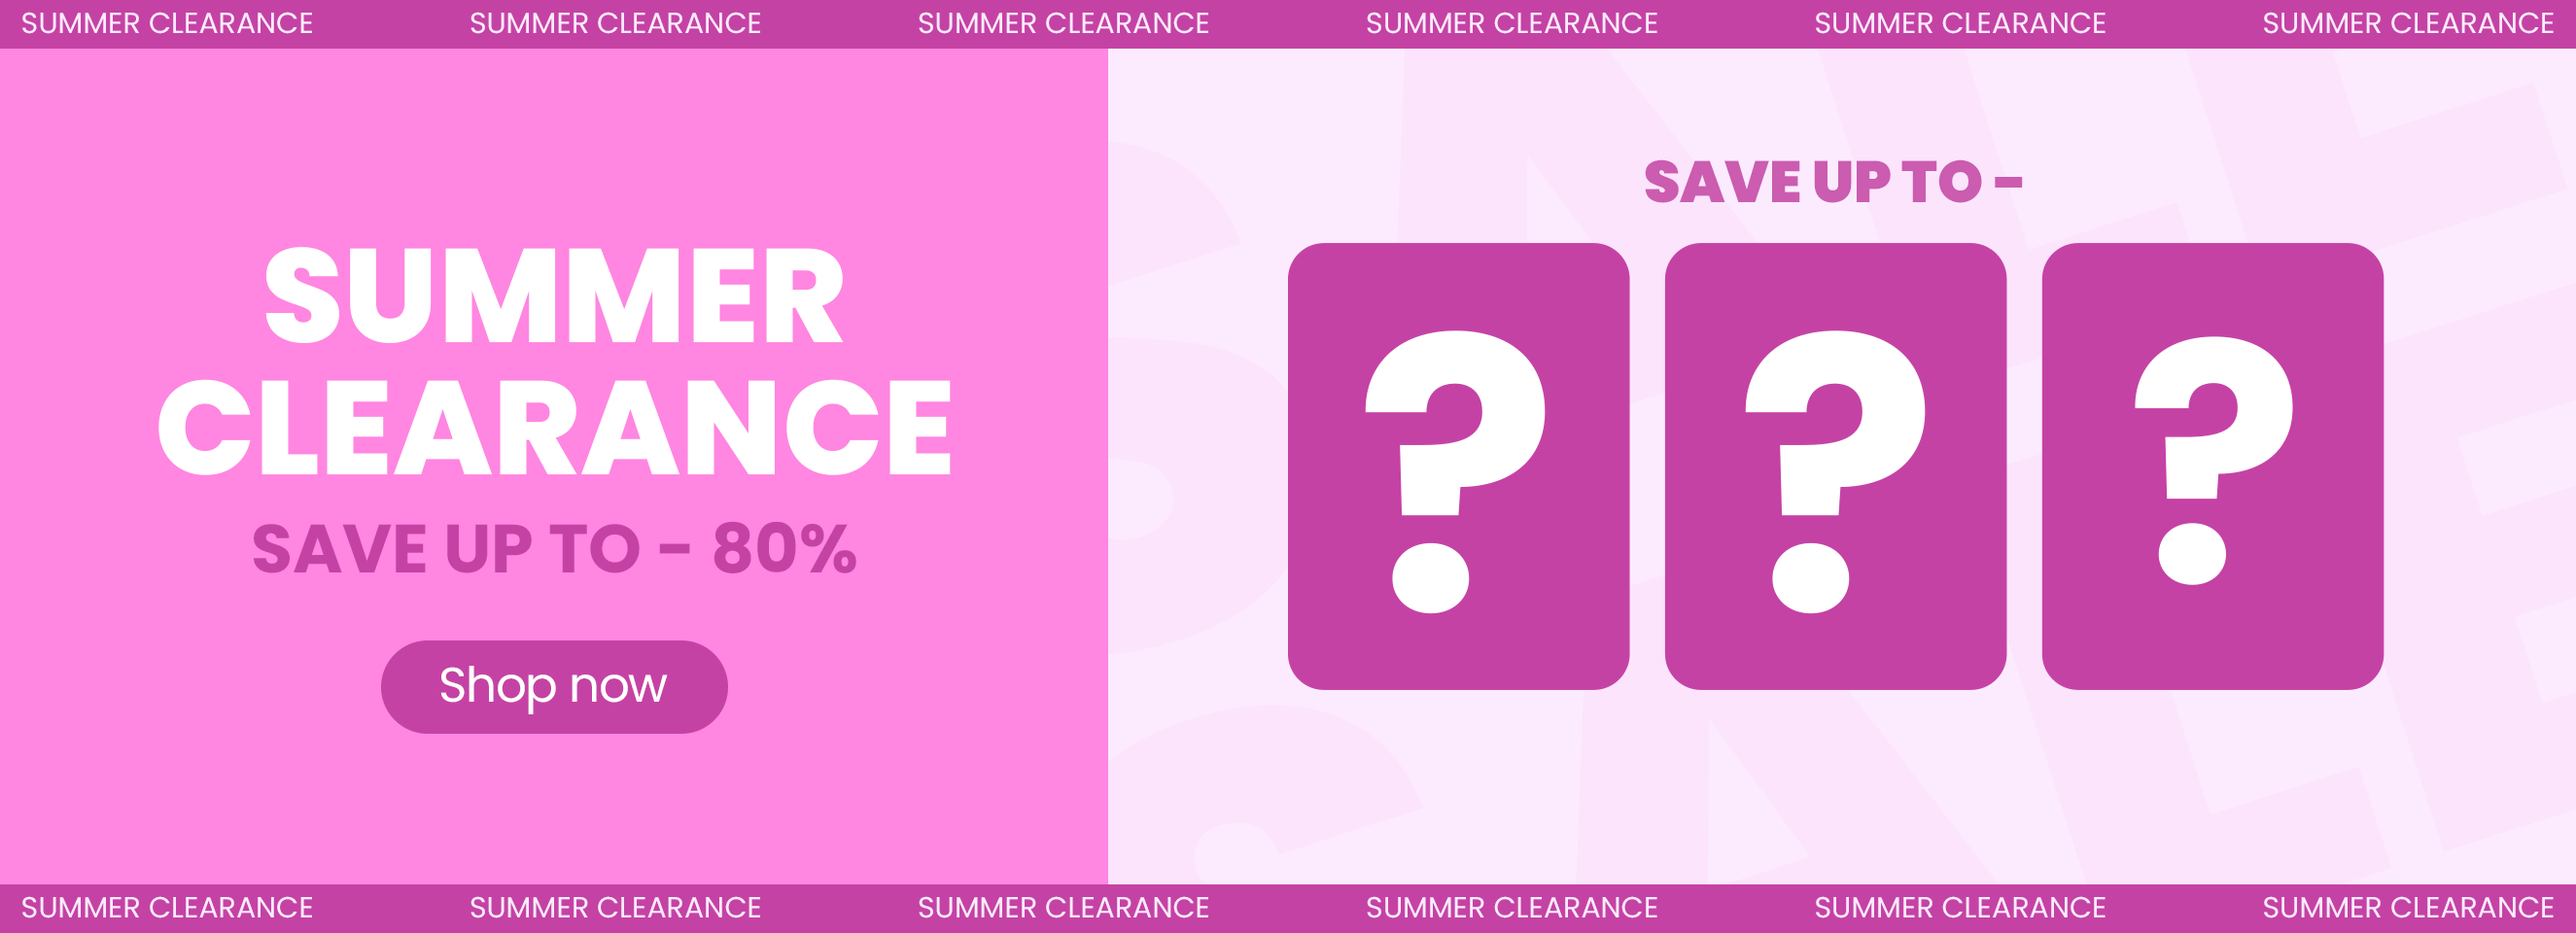 Click it to join Clearance for summer activity